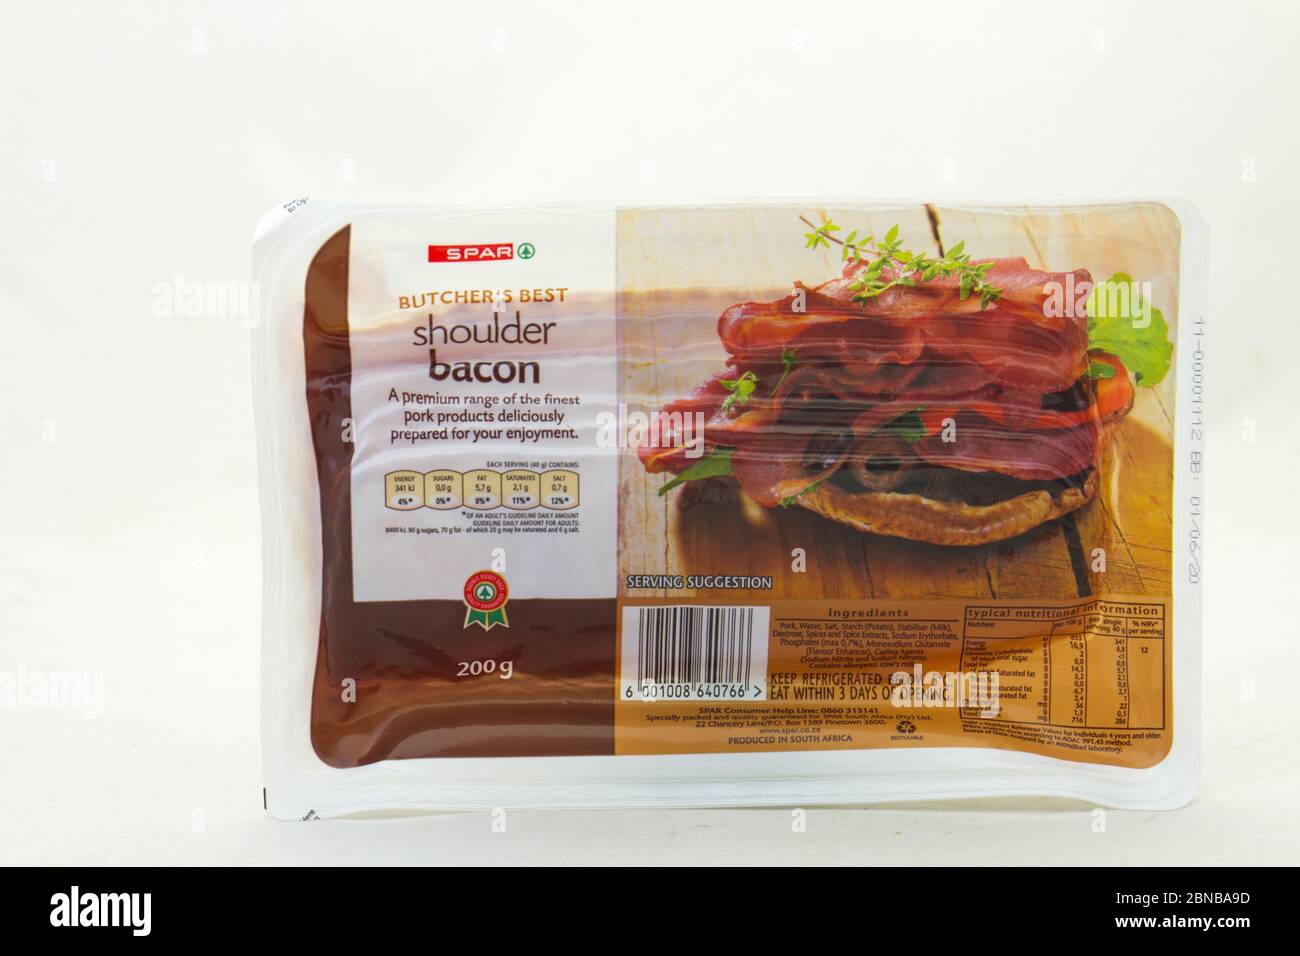 Alberton, South Africa - a packet of Spar butcher's best shoulder bacon isolated on a clear background image with copy space Stock Photo